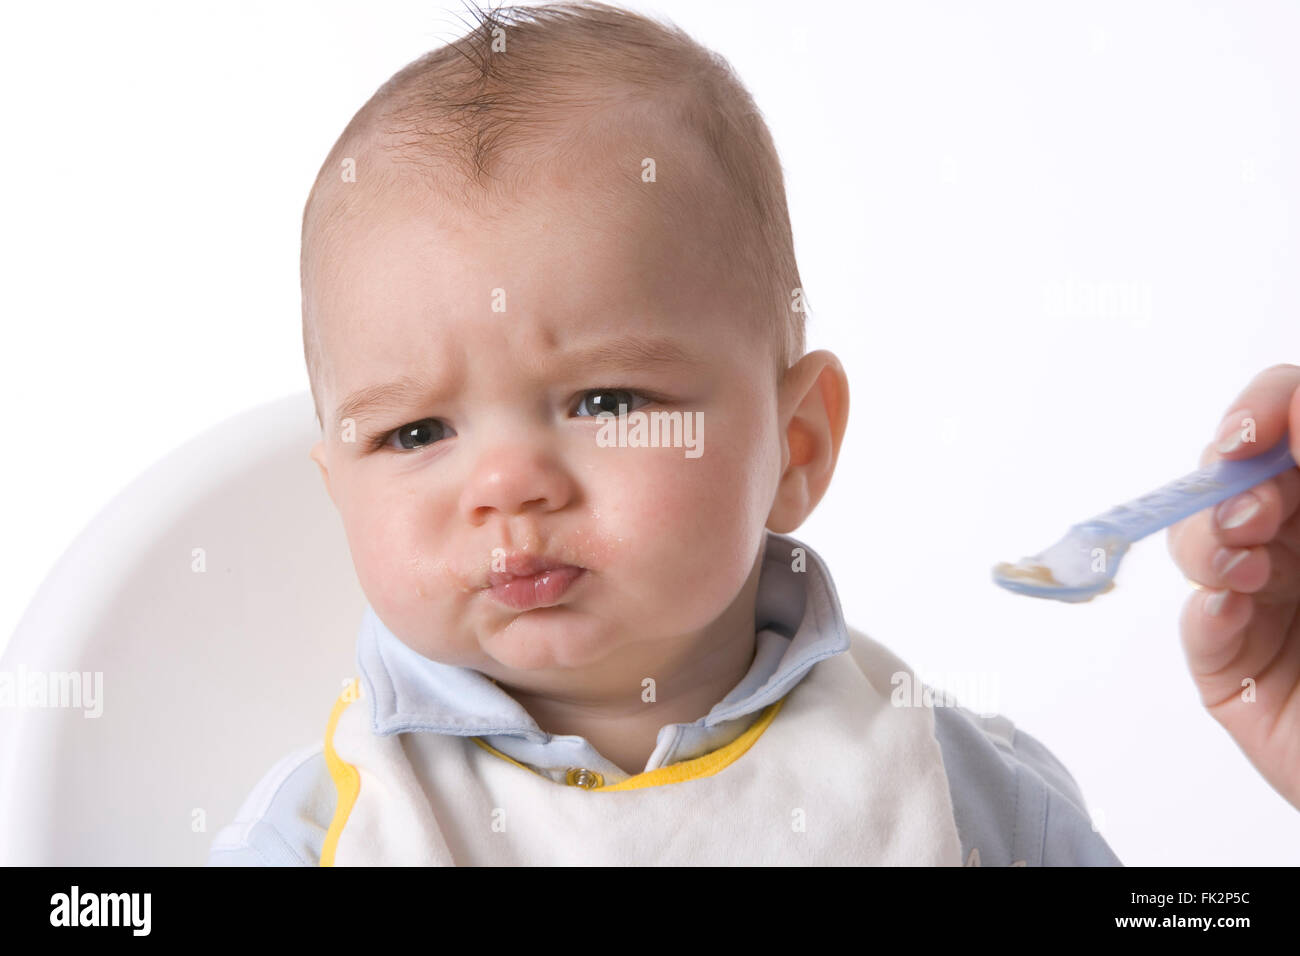 Baby Boy Is Fed With A Spoon And Has A Disapproving Expression on white background Stock Photo